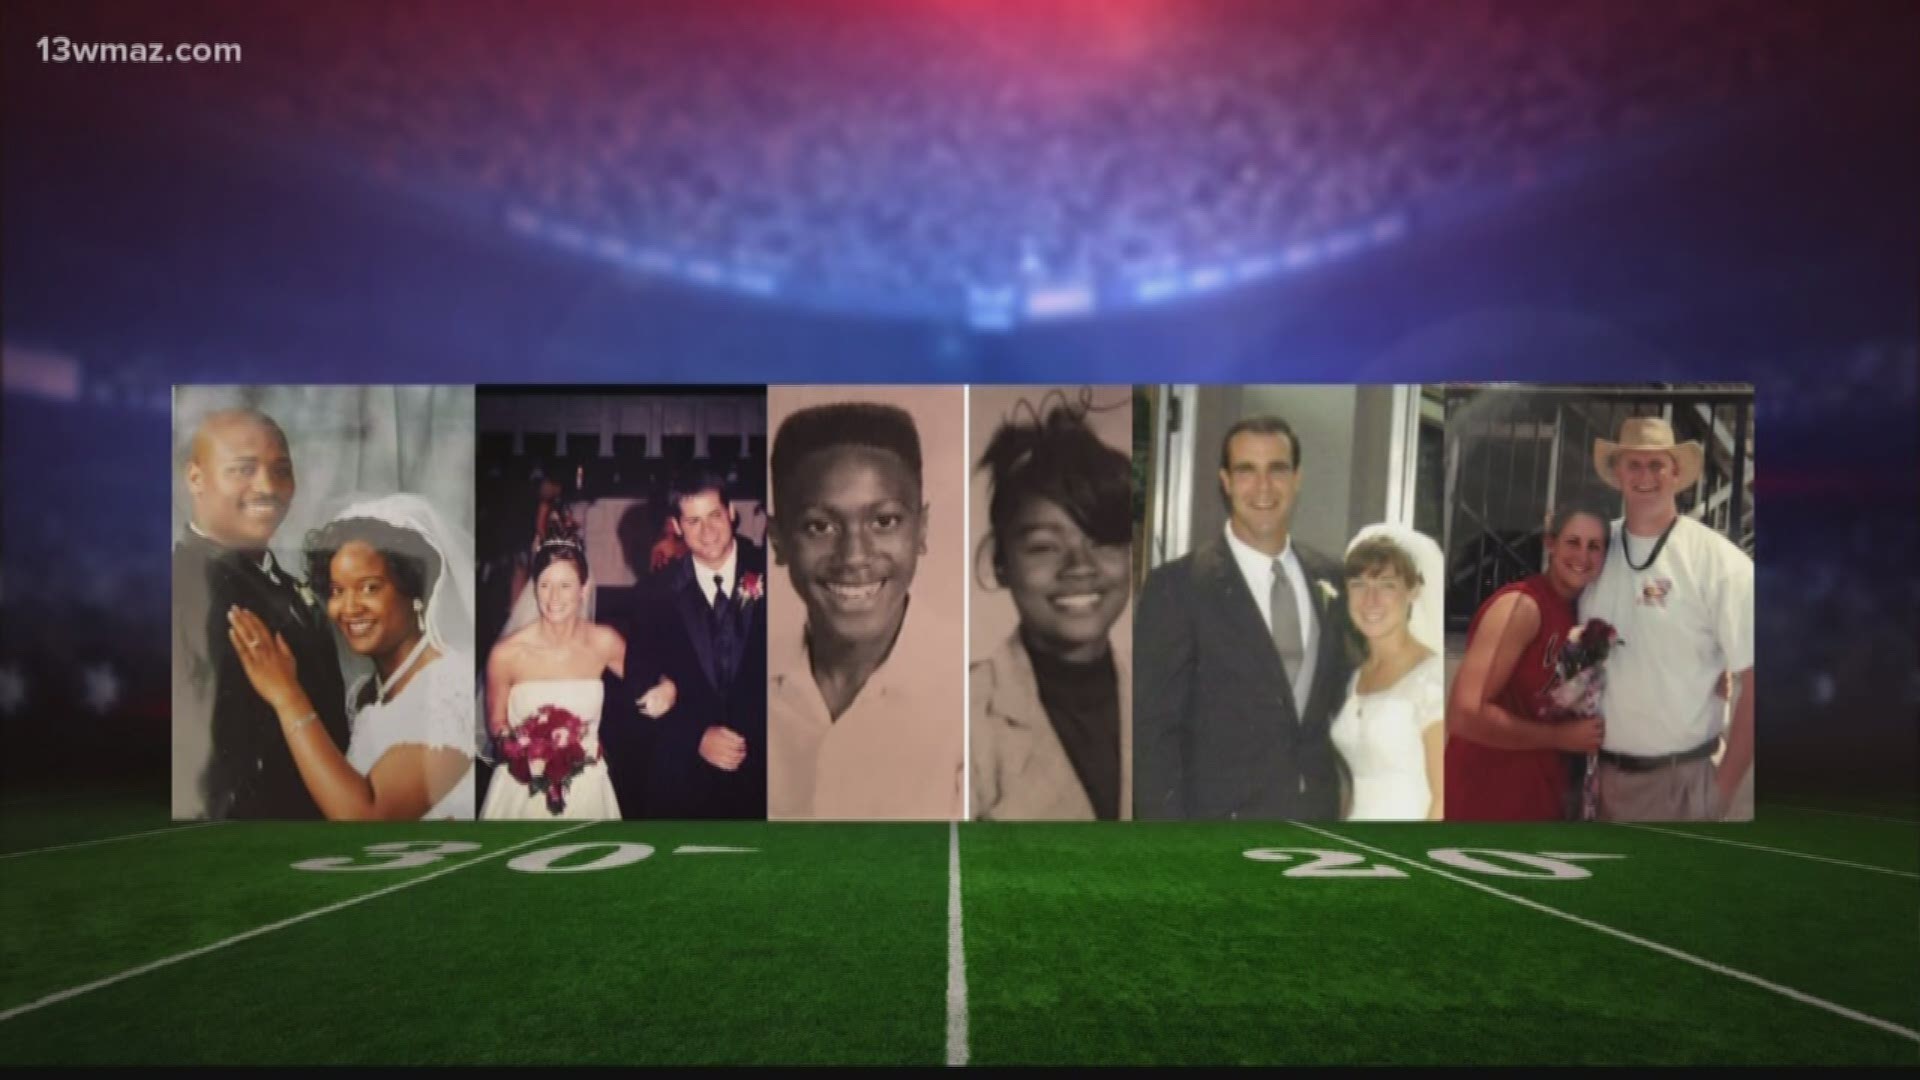 13WMAZ sat down with five Central Georgia coach's wives and asked them questions about their relationships, football, and why they love being married to a coach